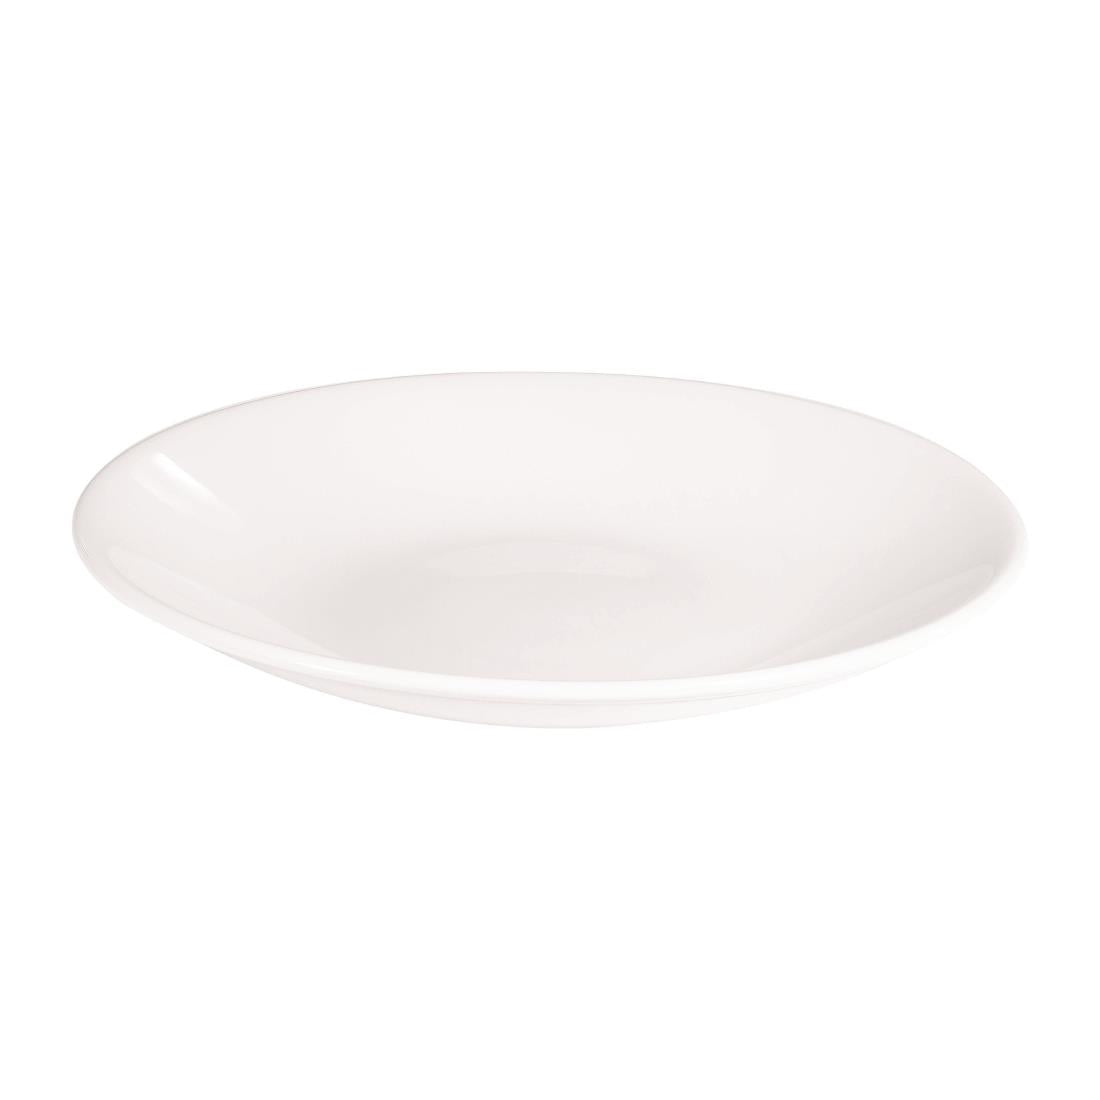 DA738 Churchill Profile Deep Coupe Plates 225mm (Pack of 12) JD Catering Equipment Solutions Ltd